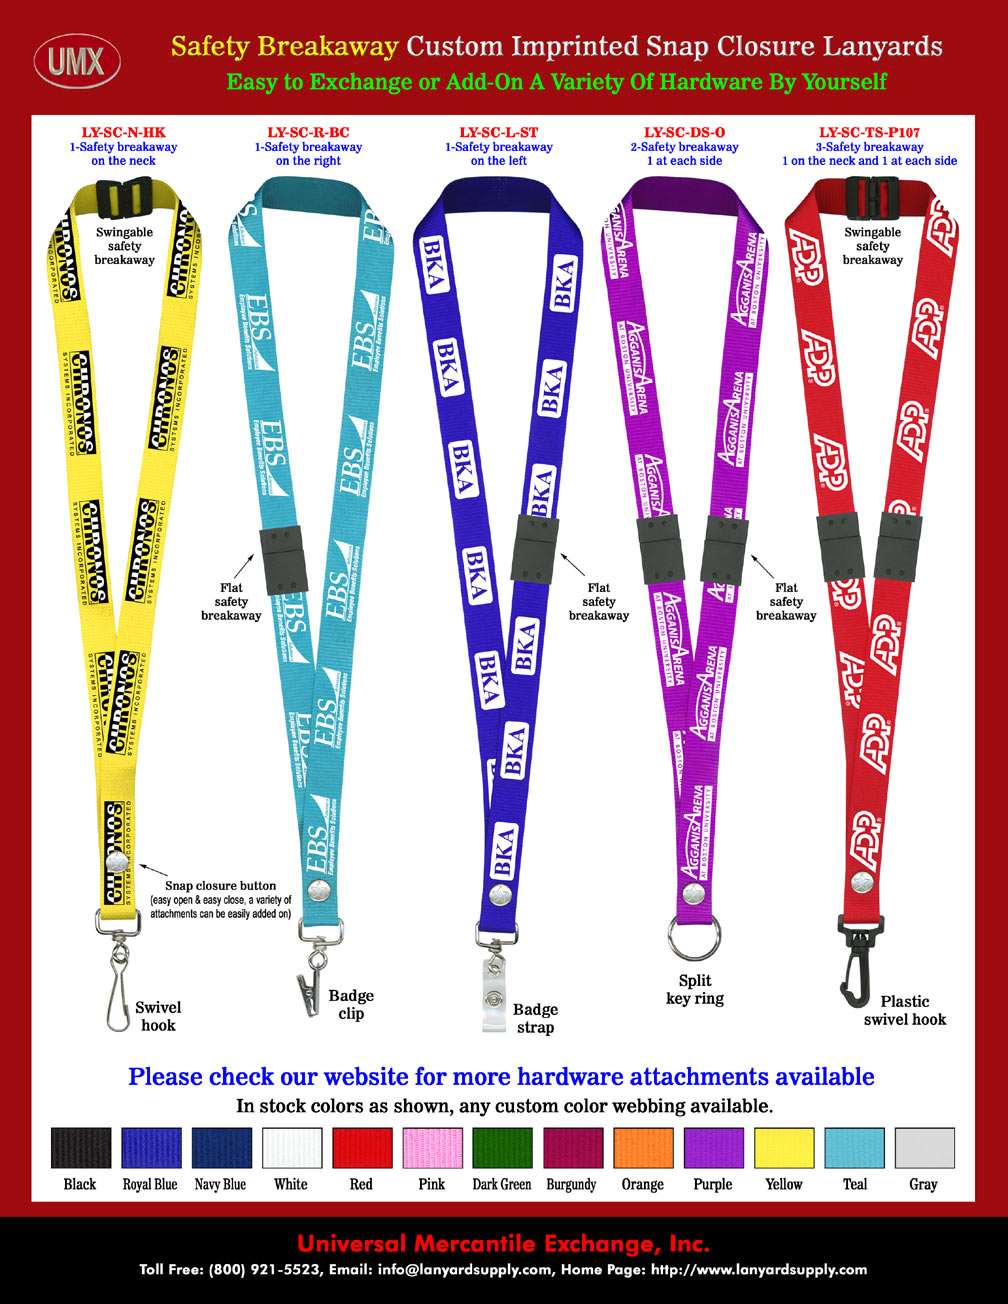 Multiple Safety Breakaway Snap-On Neck Lanyards With Photo Quality Custom Imprint.